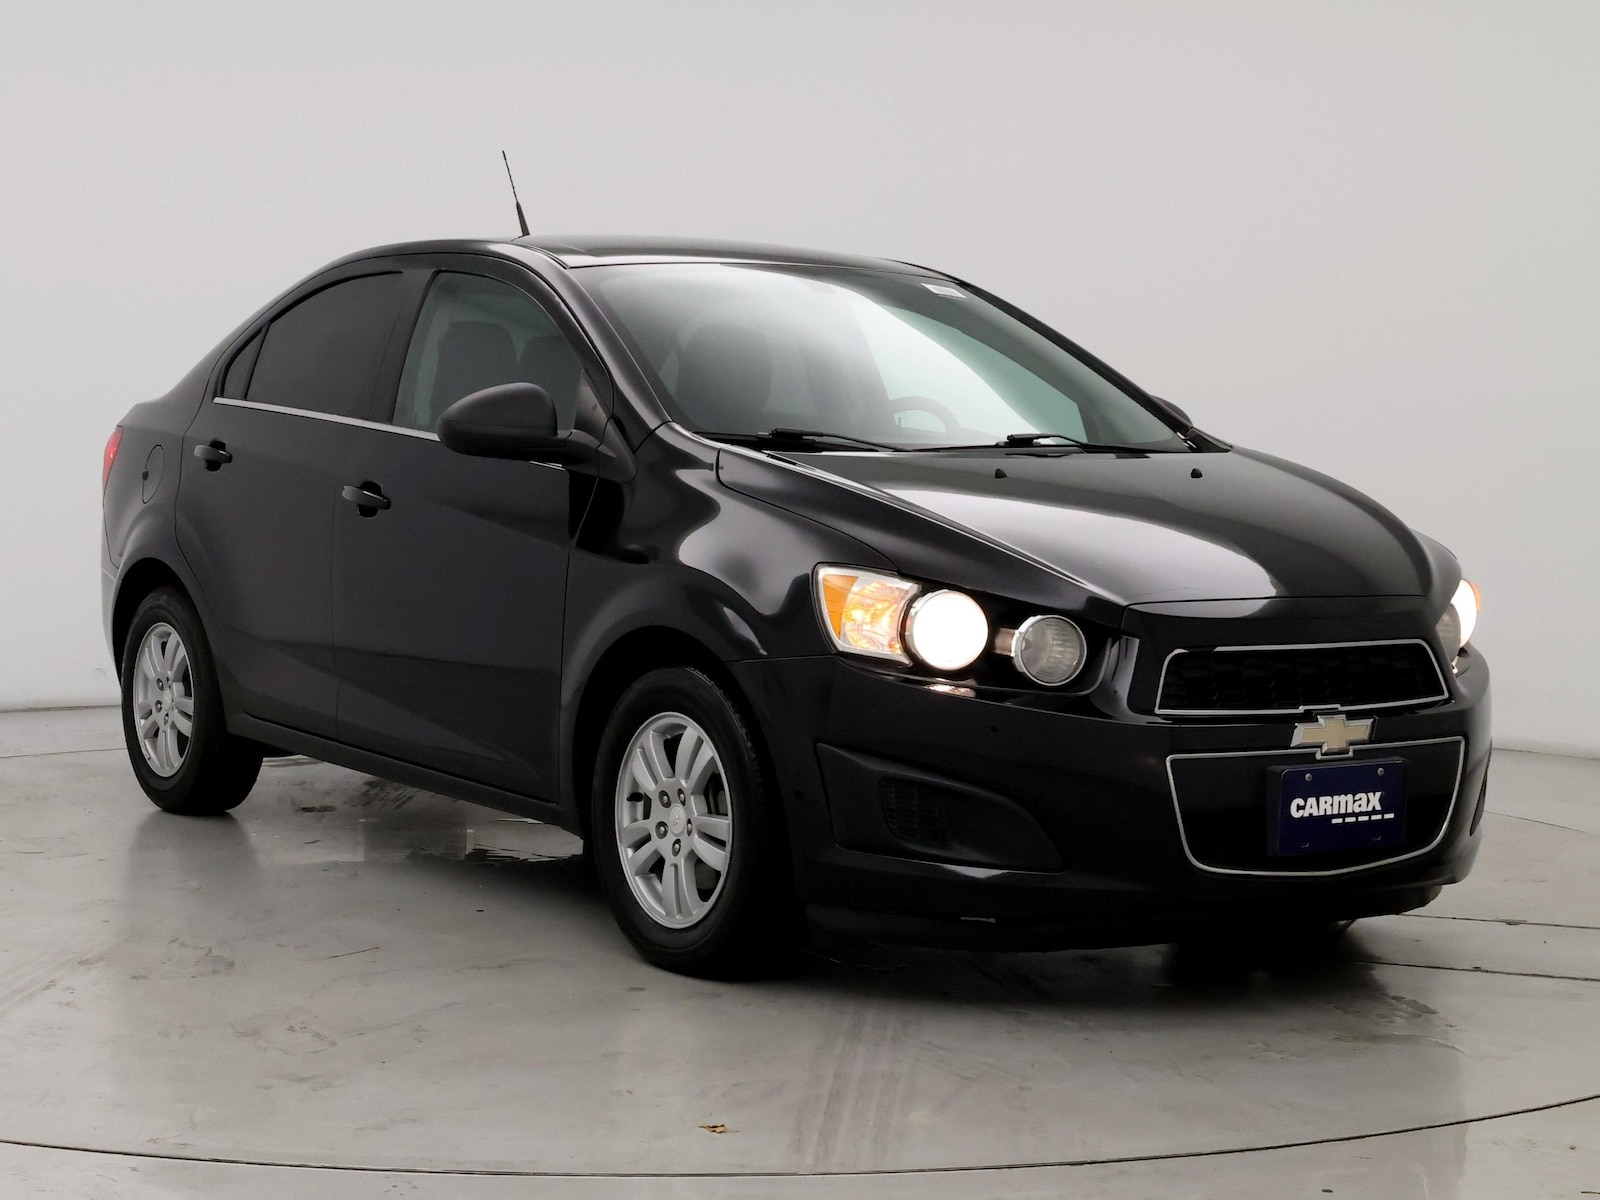 Used 2014 Chevrolet Sonic LT with VIN 1G1JC5SH2E4167917 for sale in Spokane Valley, WA